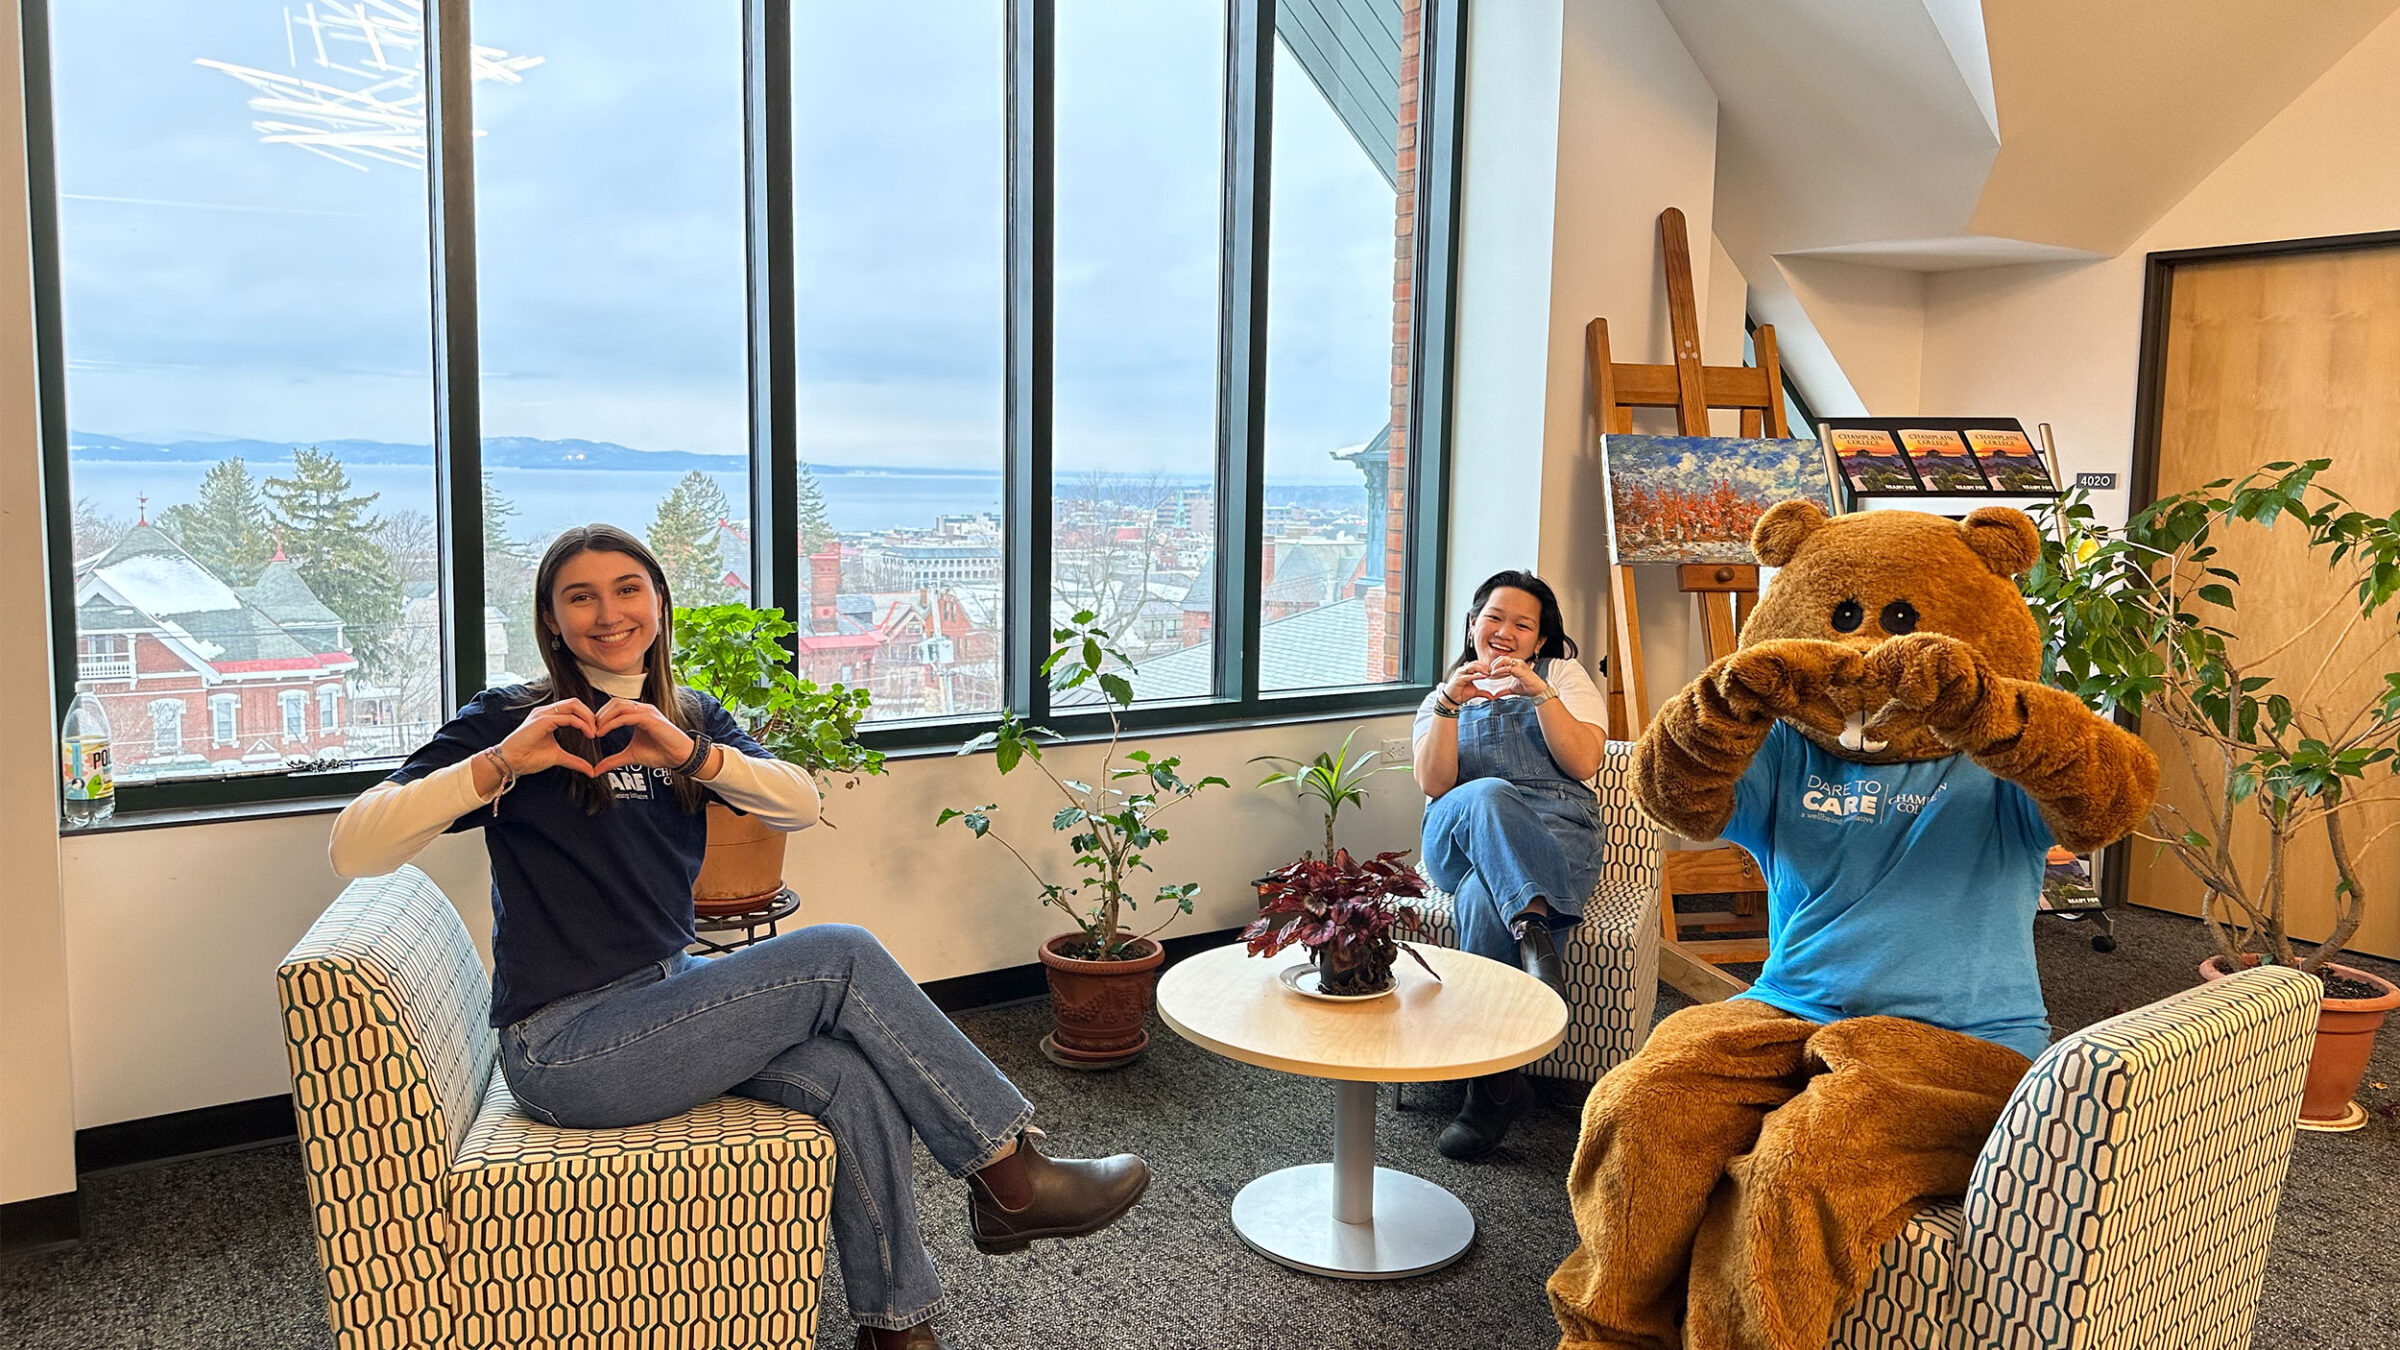 two students and chauncey the beaver mascot sit on chairs, making heart shapes with their hands. Lake Champlain is visible through the large windows behind them.